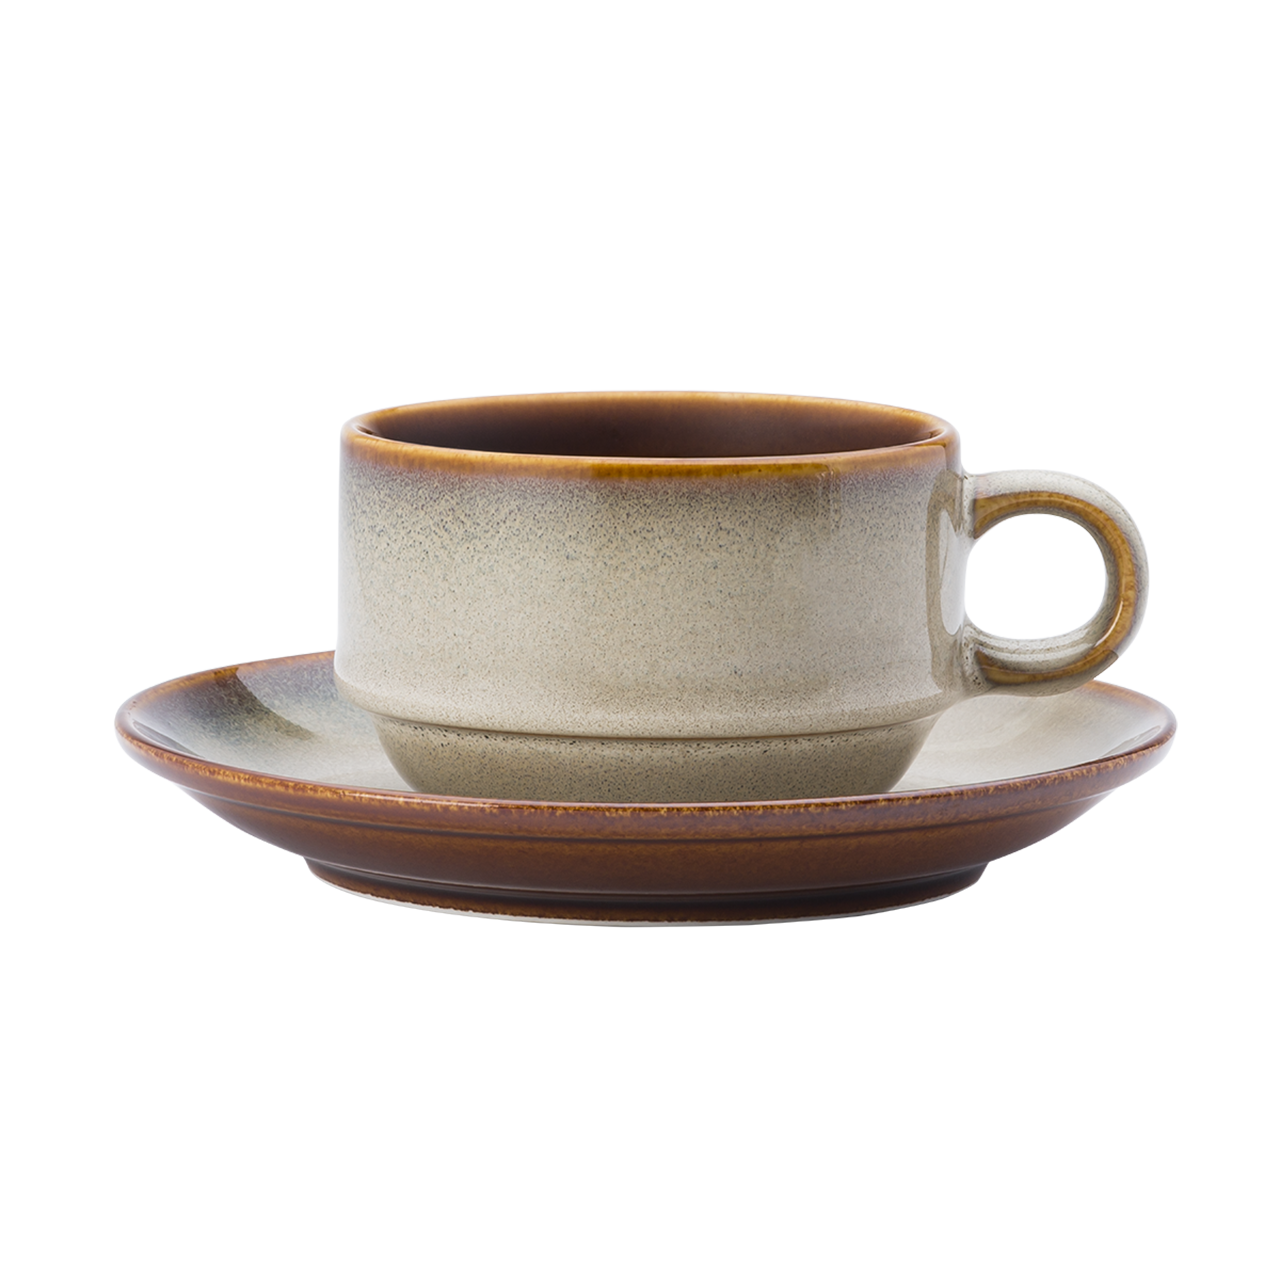 Rustic - Cup & Saucer